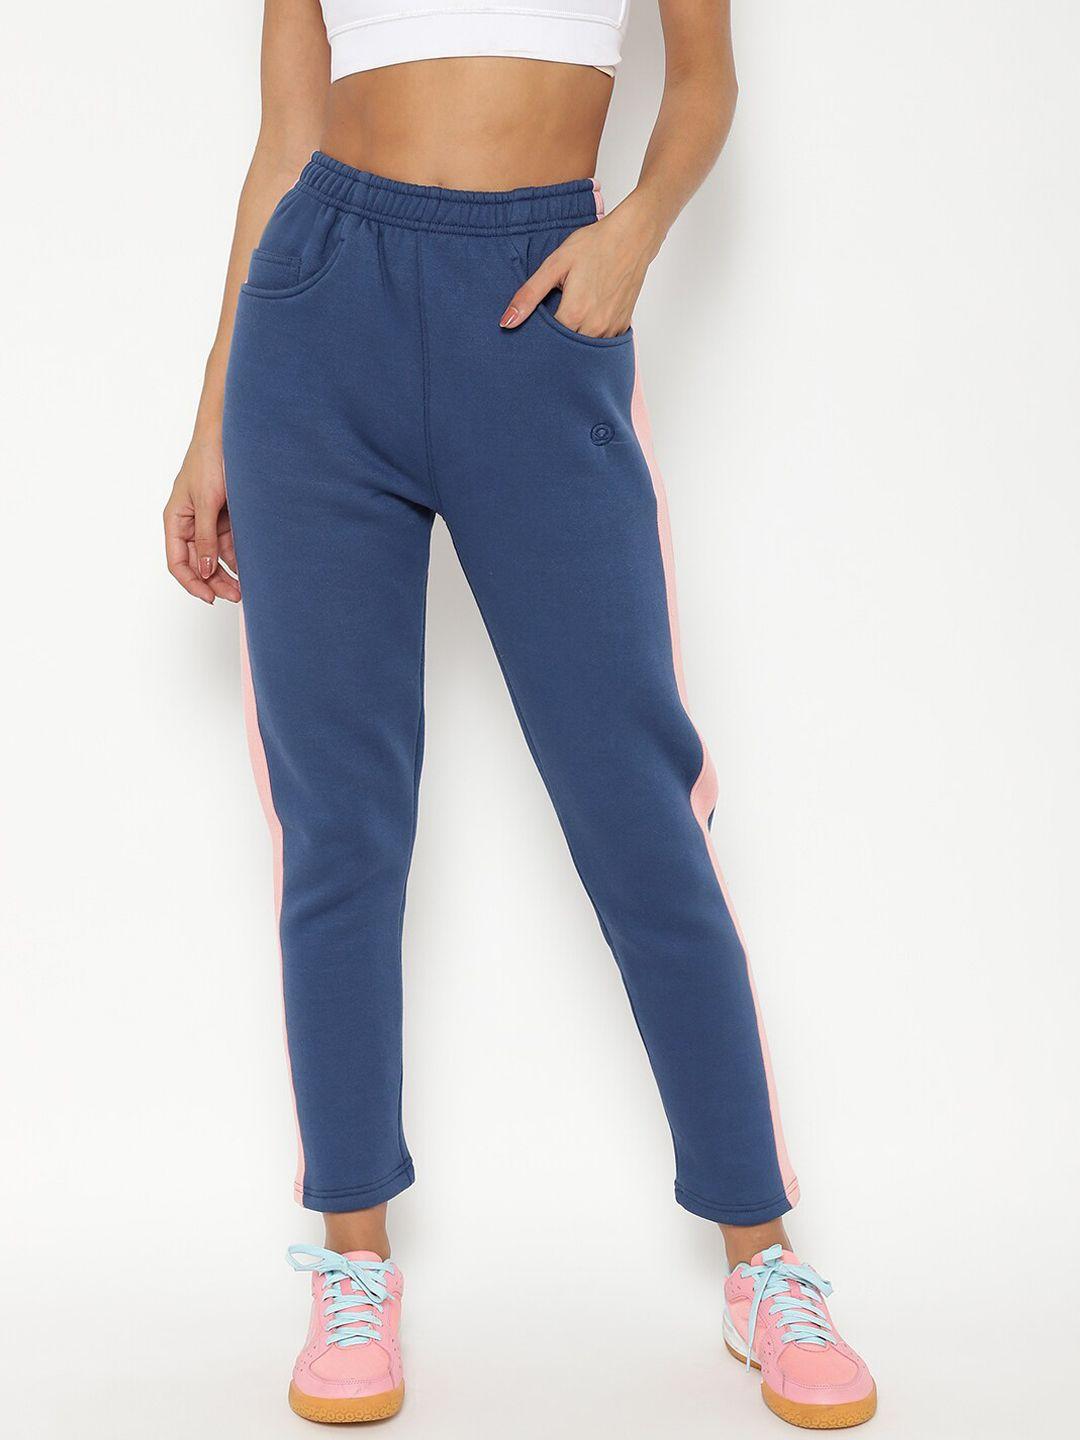 chkokko women blue solid antimicrobial track pants with panel